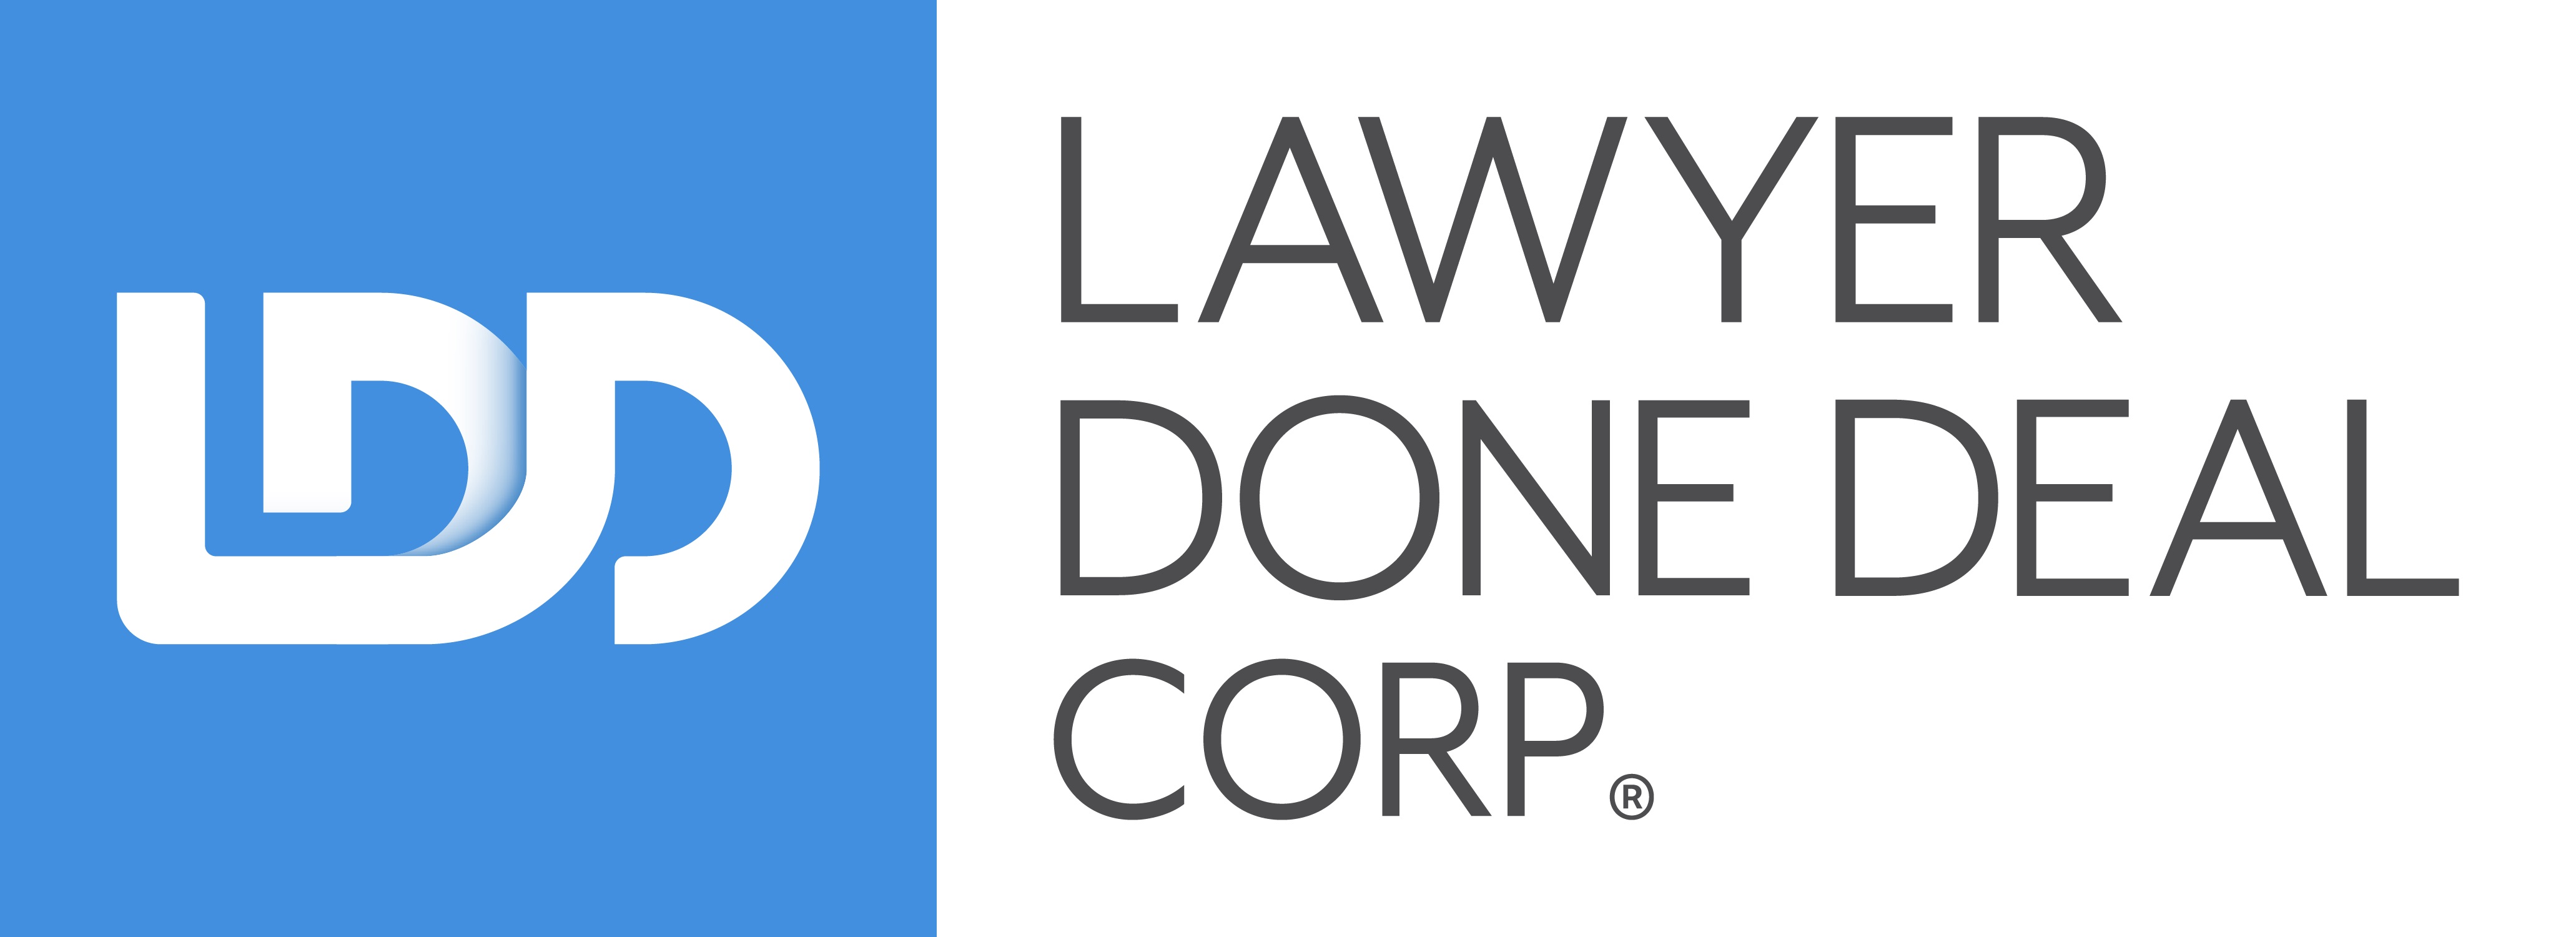 LawyerDoneDeal Corp.